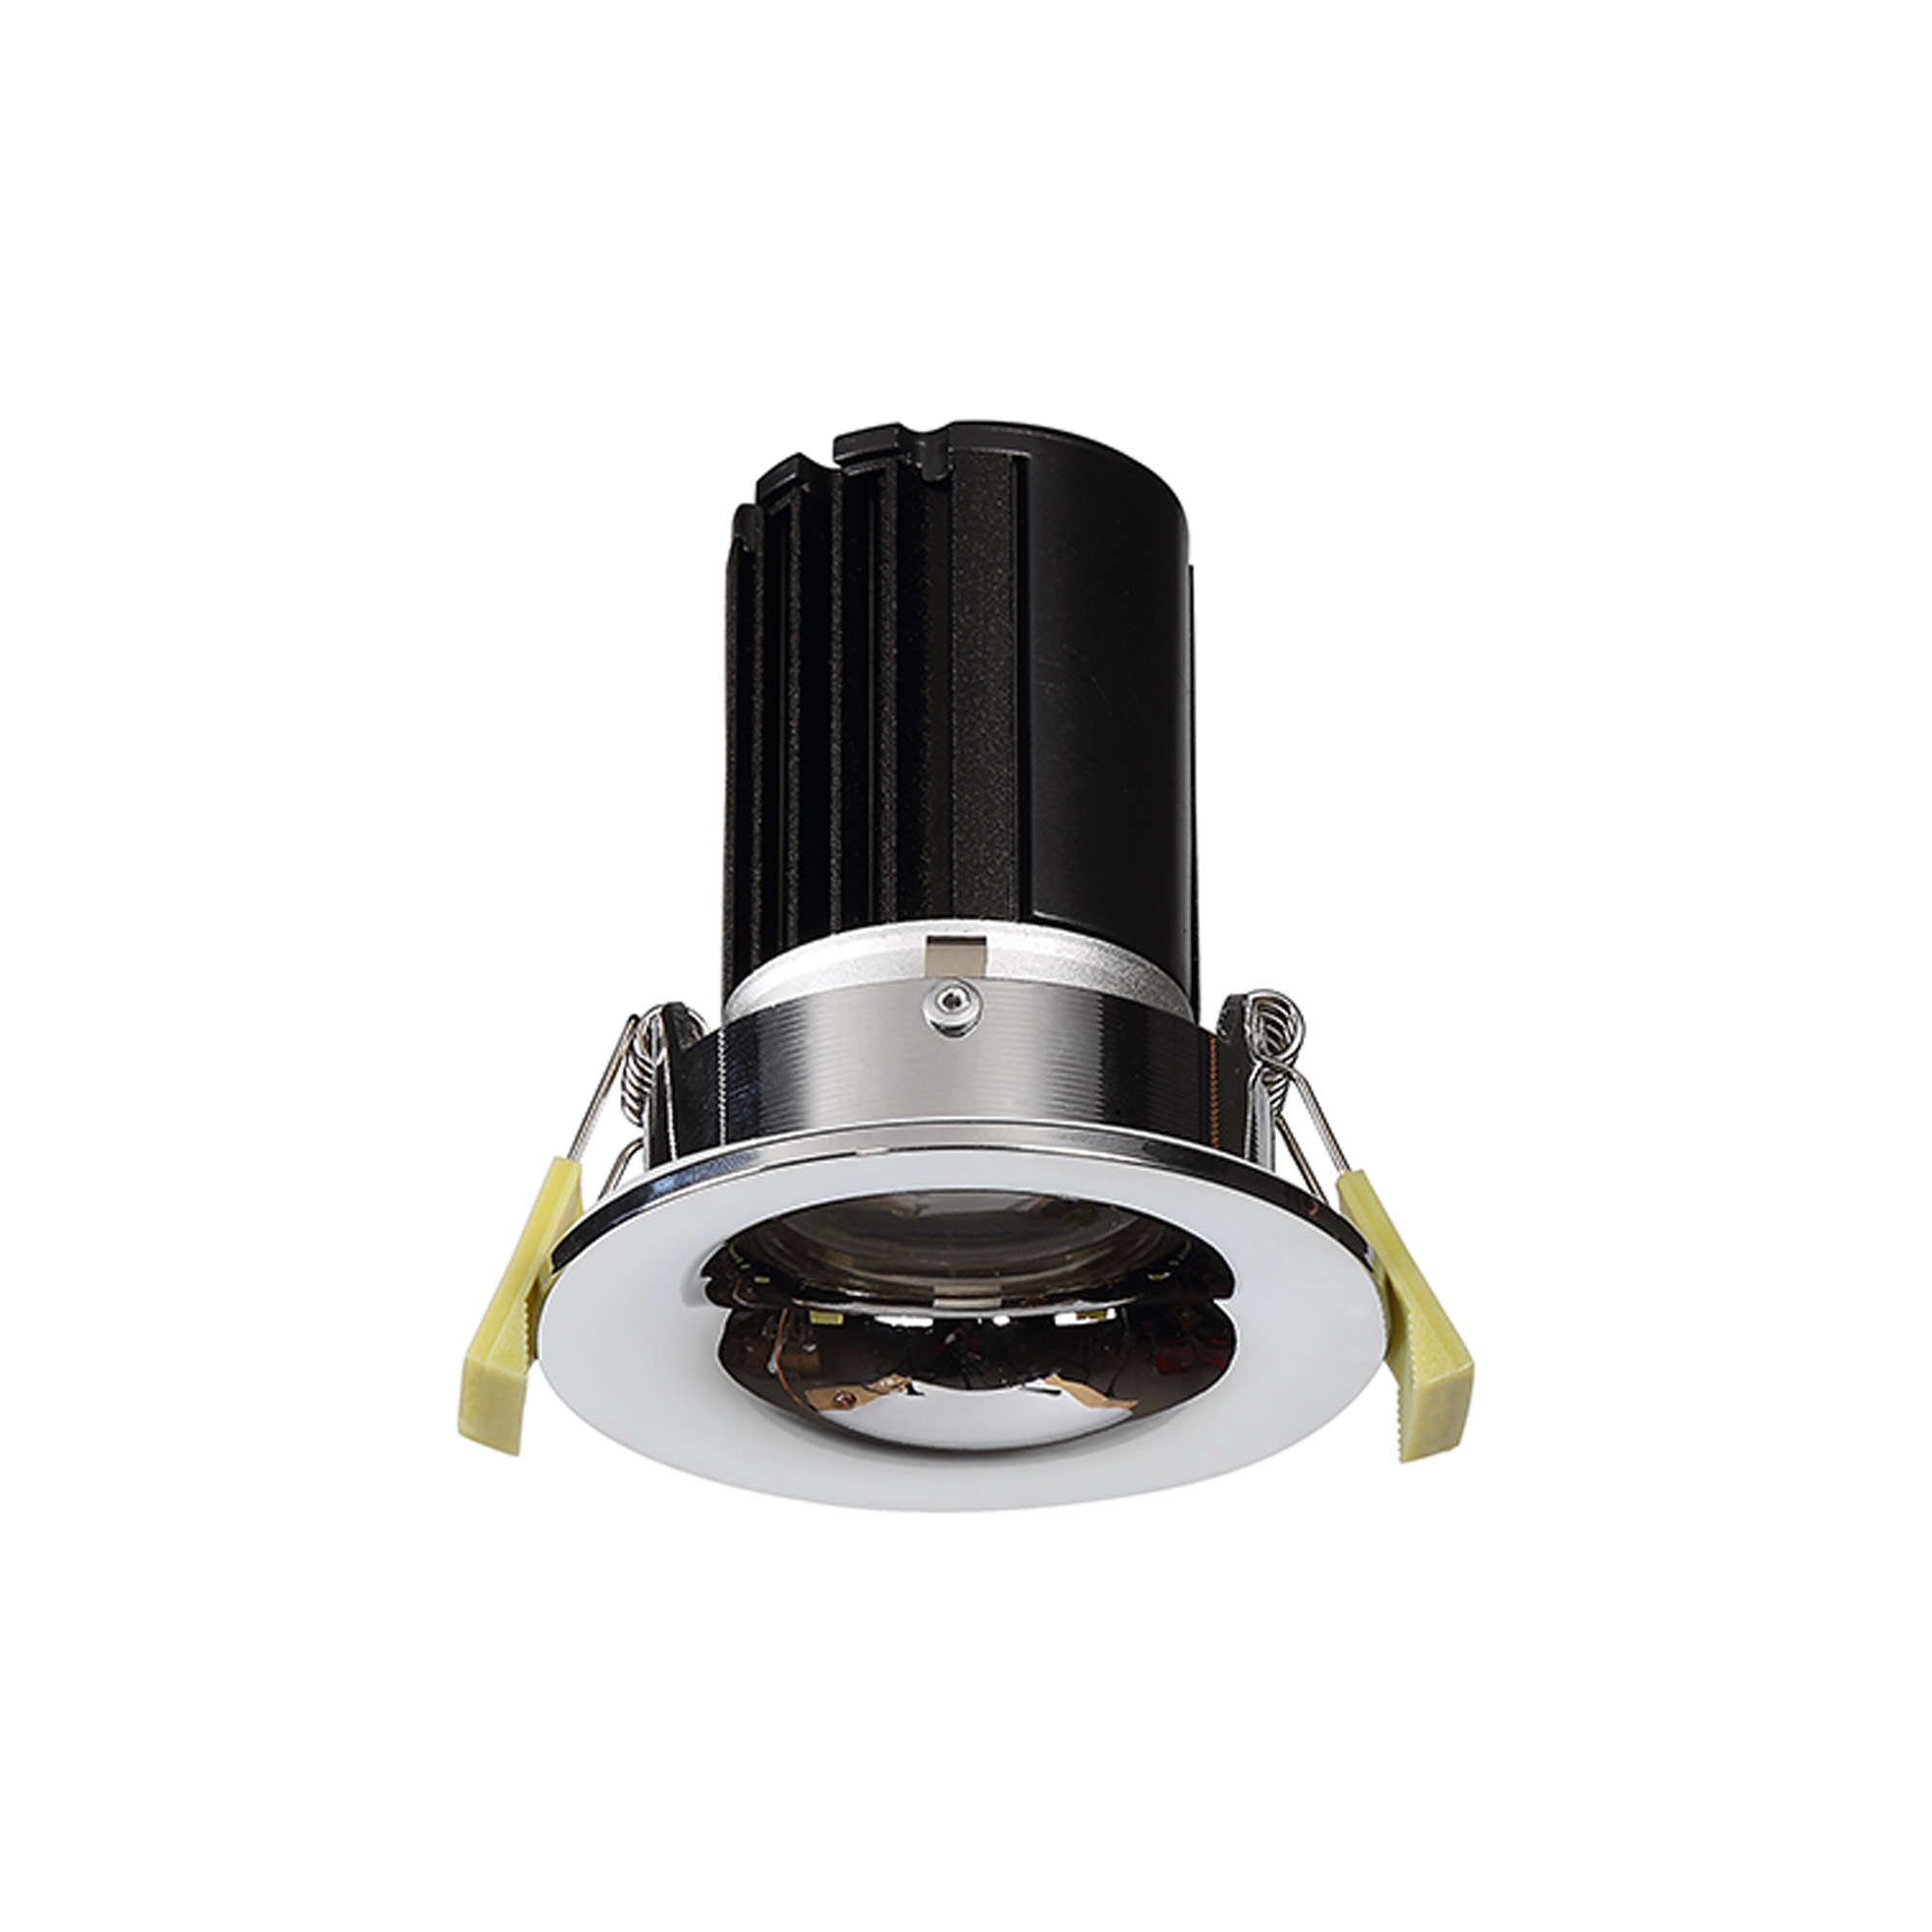 DM201468  Bruve 9 Tridonic powered 9W 2700K 700lm 24° LED Engine;250mA ; CRI>90 LED Engine Polished Chrome Fixed Round Recessed Downlight; Inner Glass cover; IP65